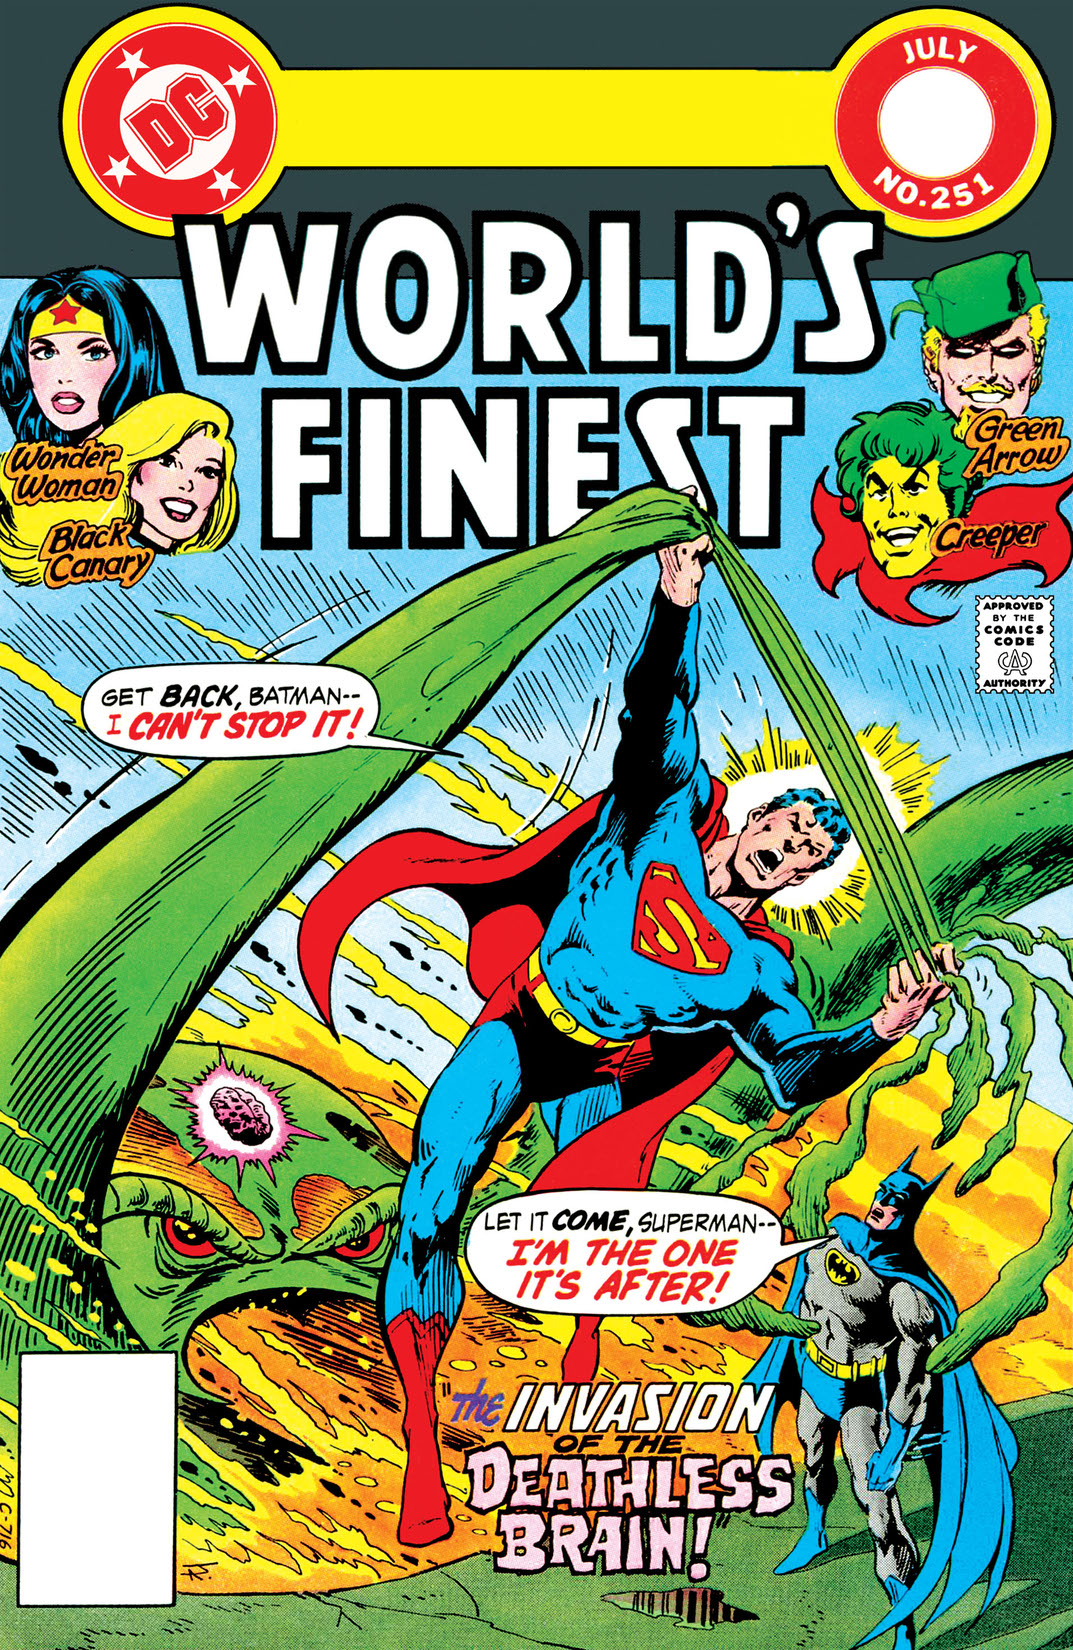 World's Finest Comics (1941-) #251 preview images